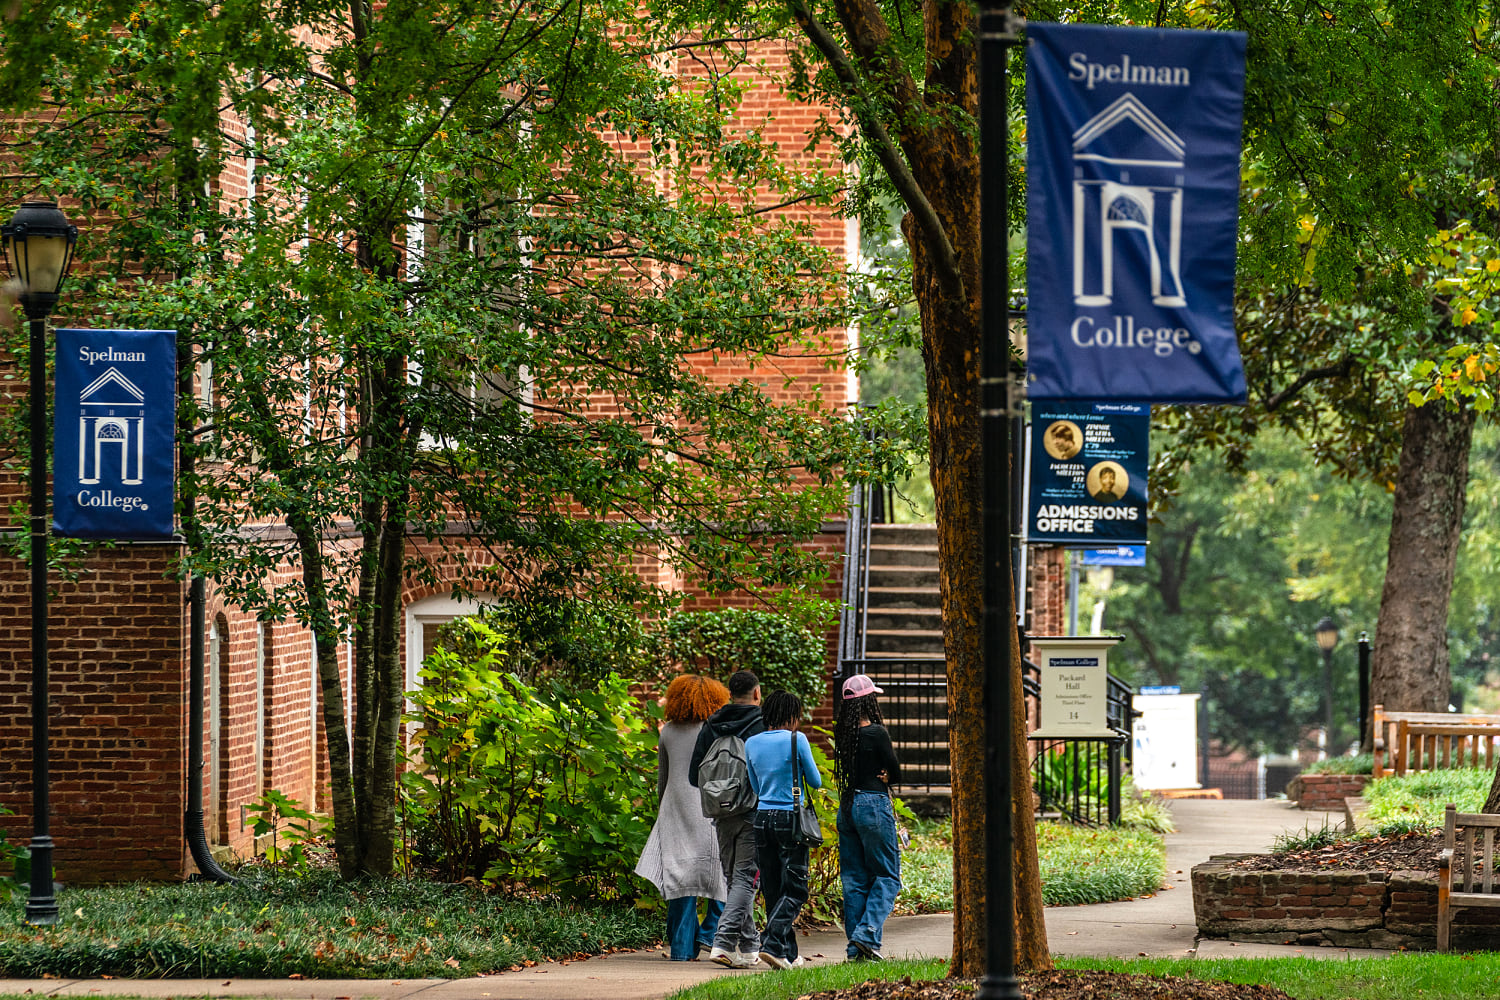 Spelman College to receive $100 million, largest single donation to an HBCU